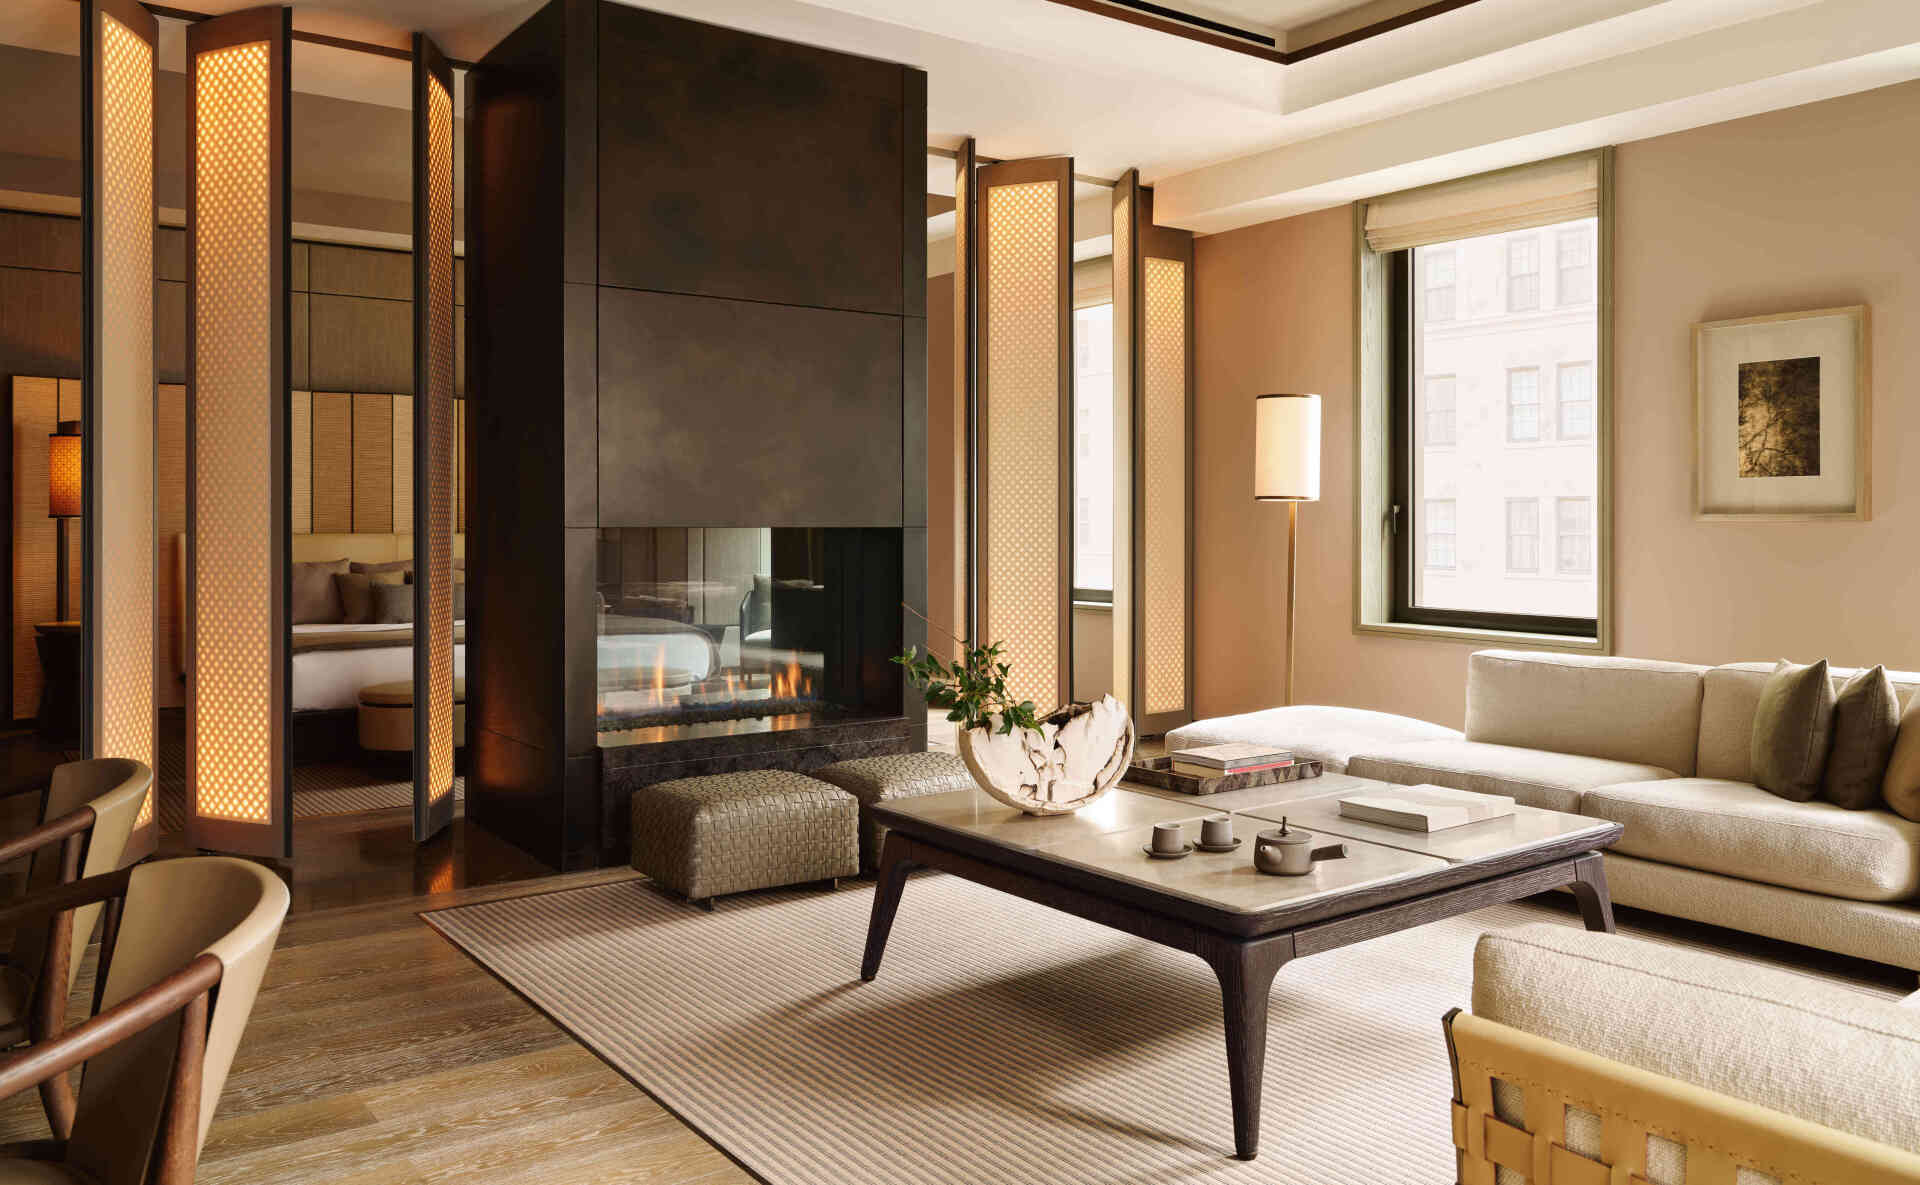 World's Most Expensive City Hotel: world record in New York City, New York